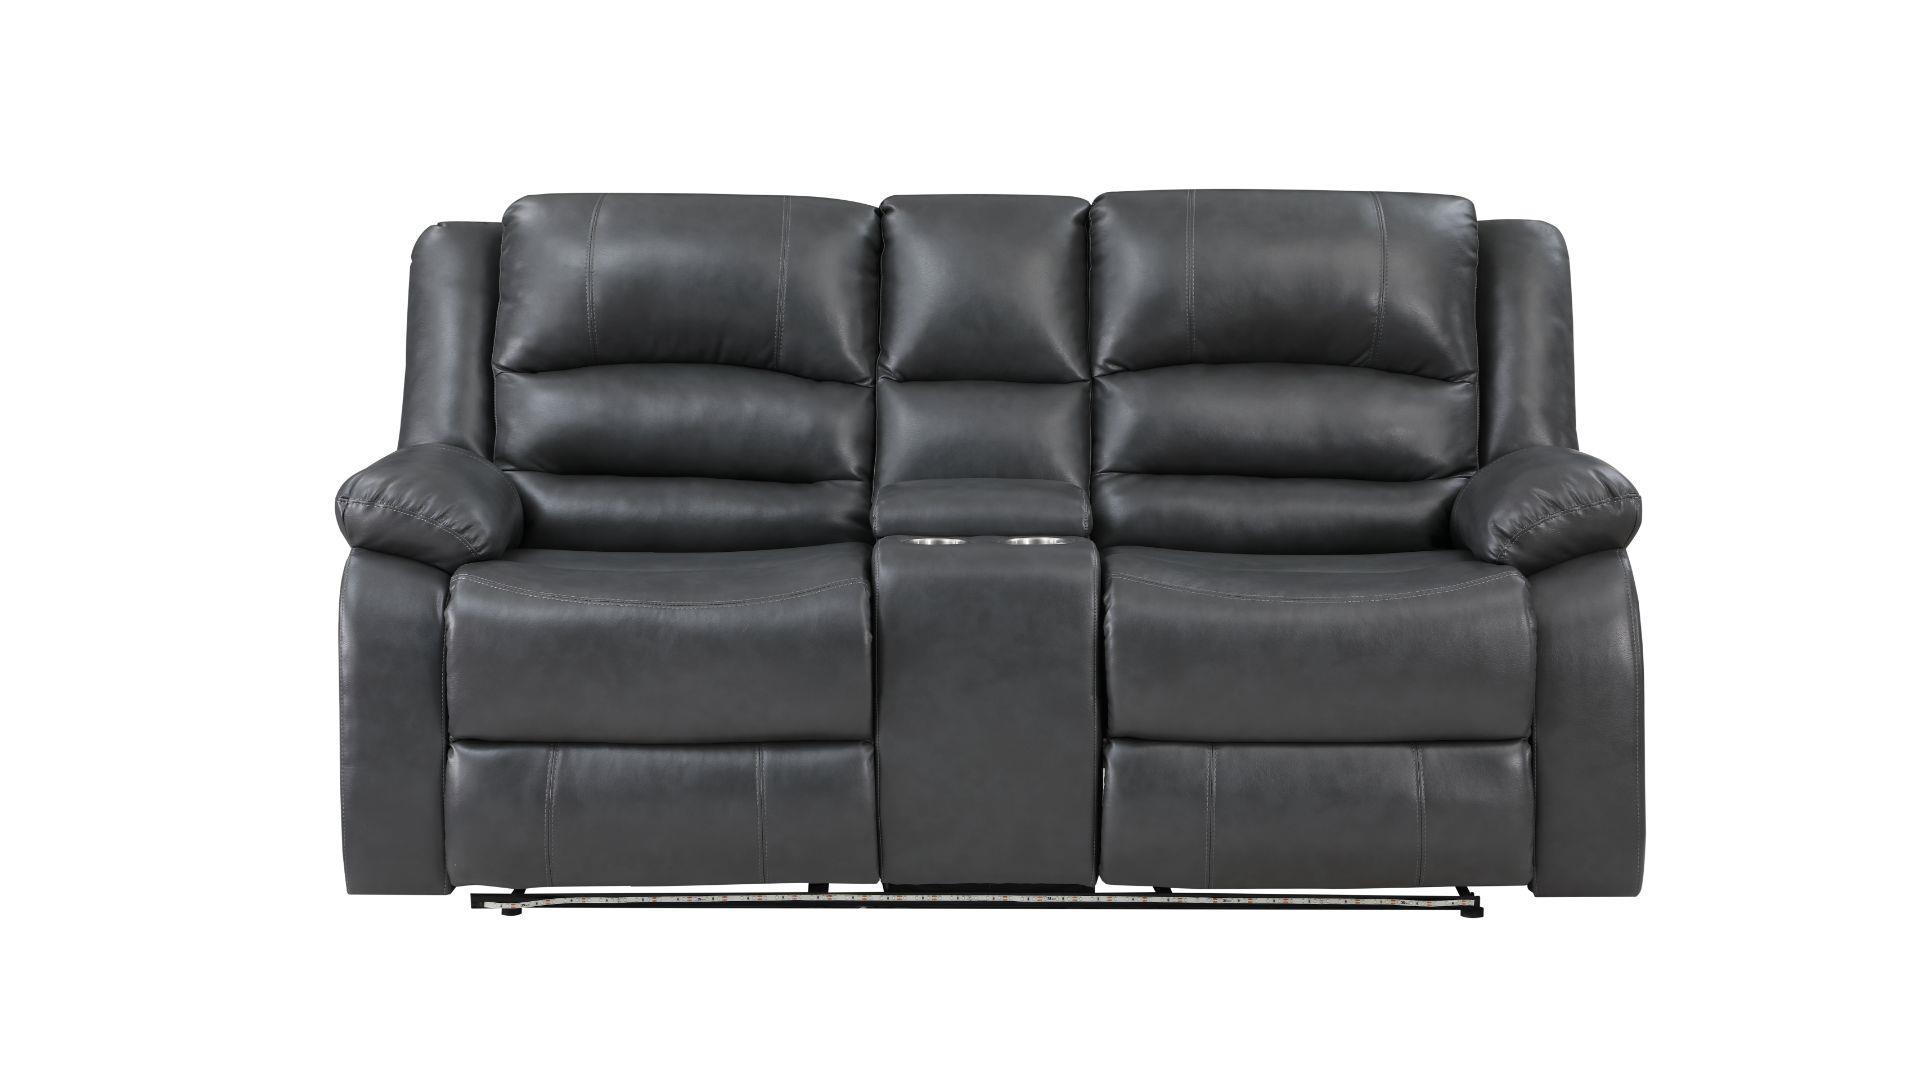 Contemporary, Modern Recliner Loveseat MARTIN GR MARTIN-GR-L in Gray Faux Leather